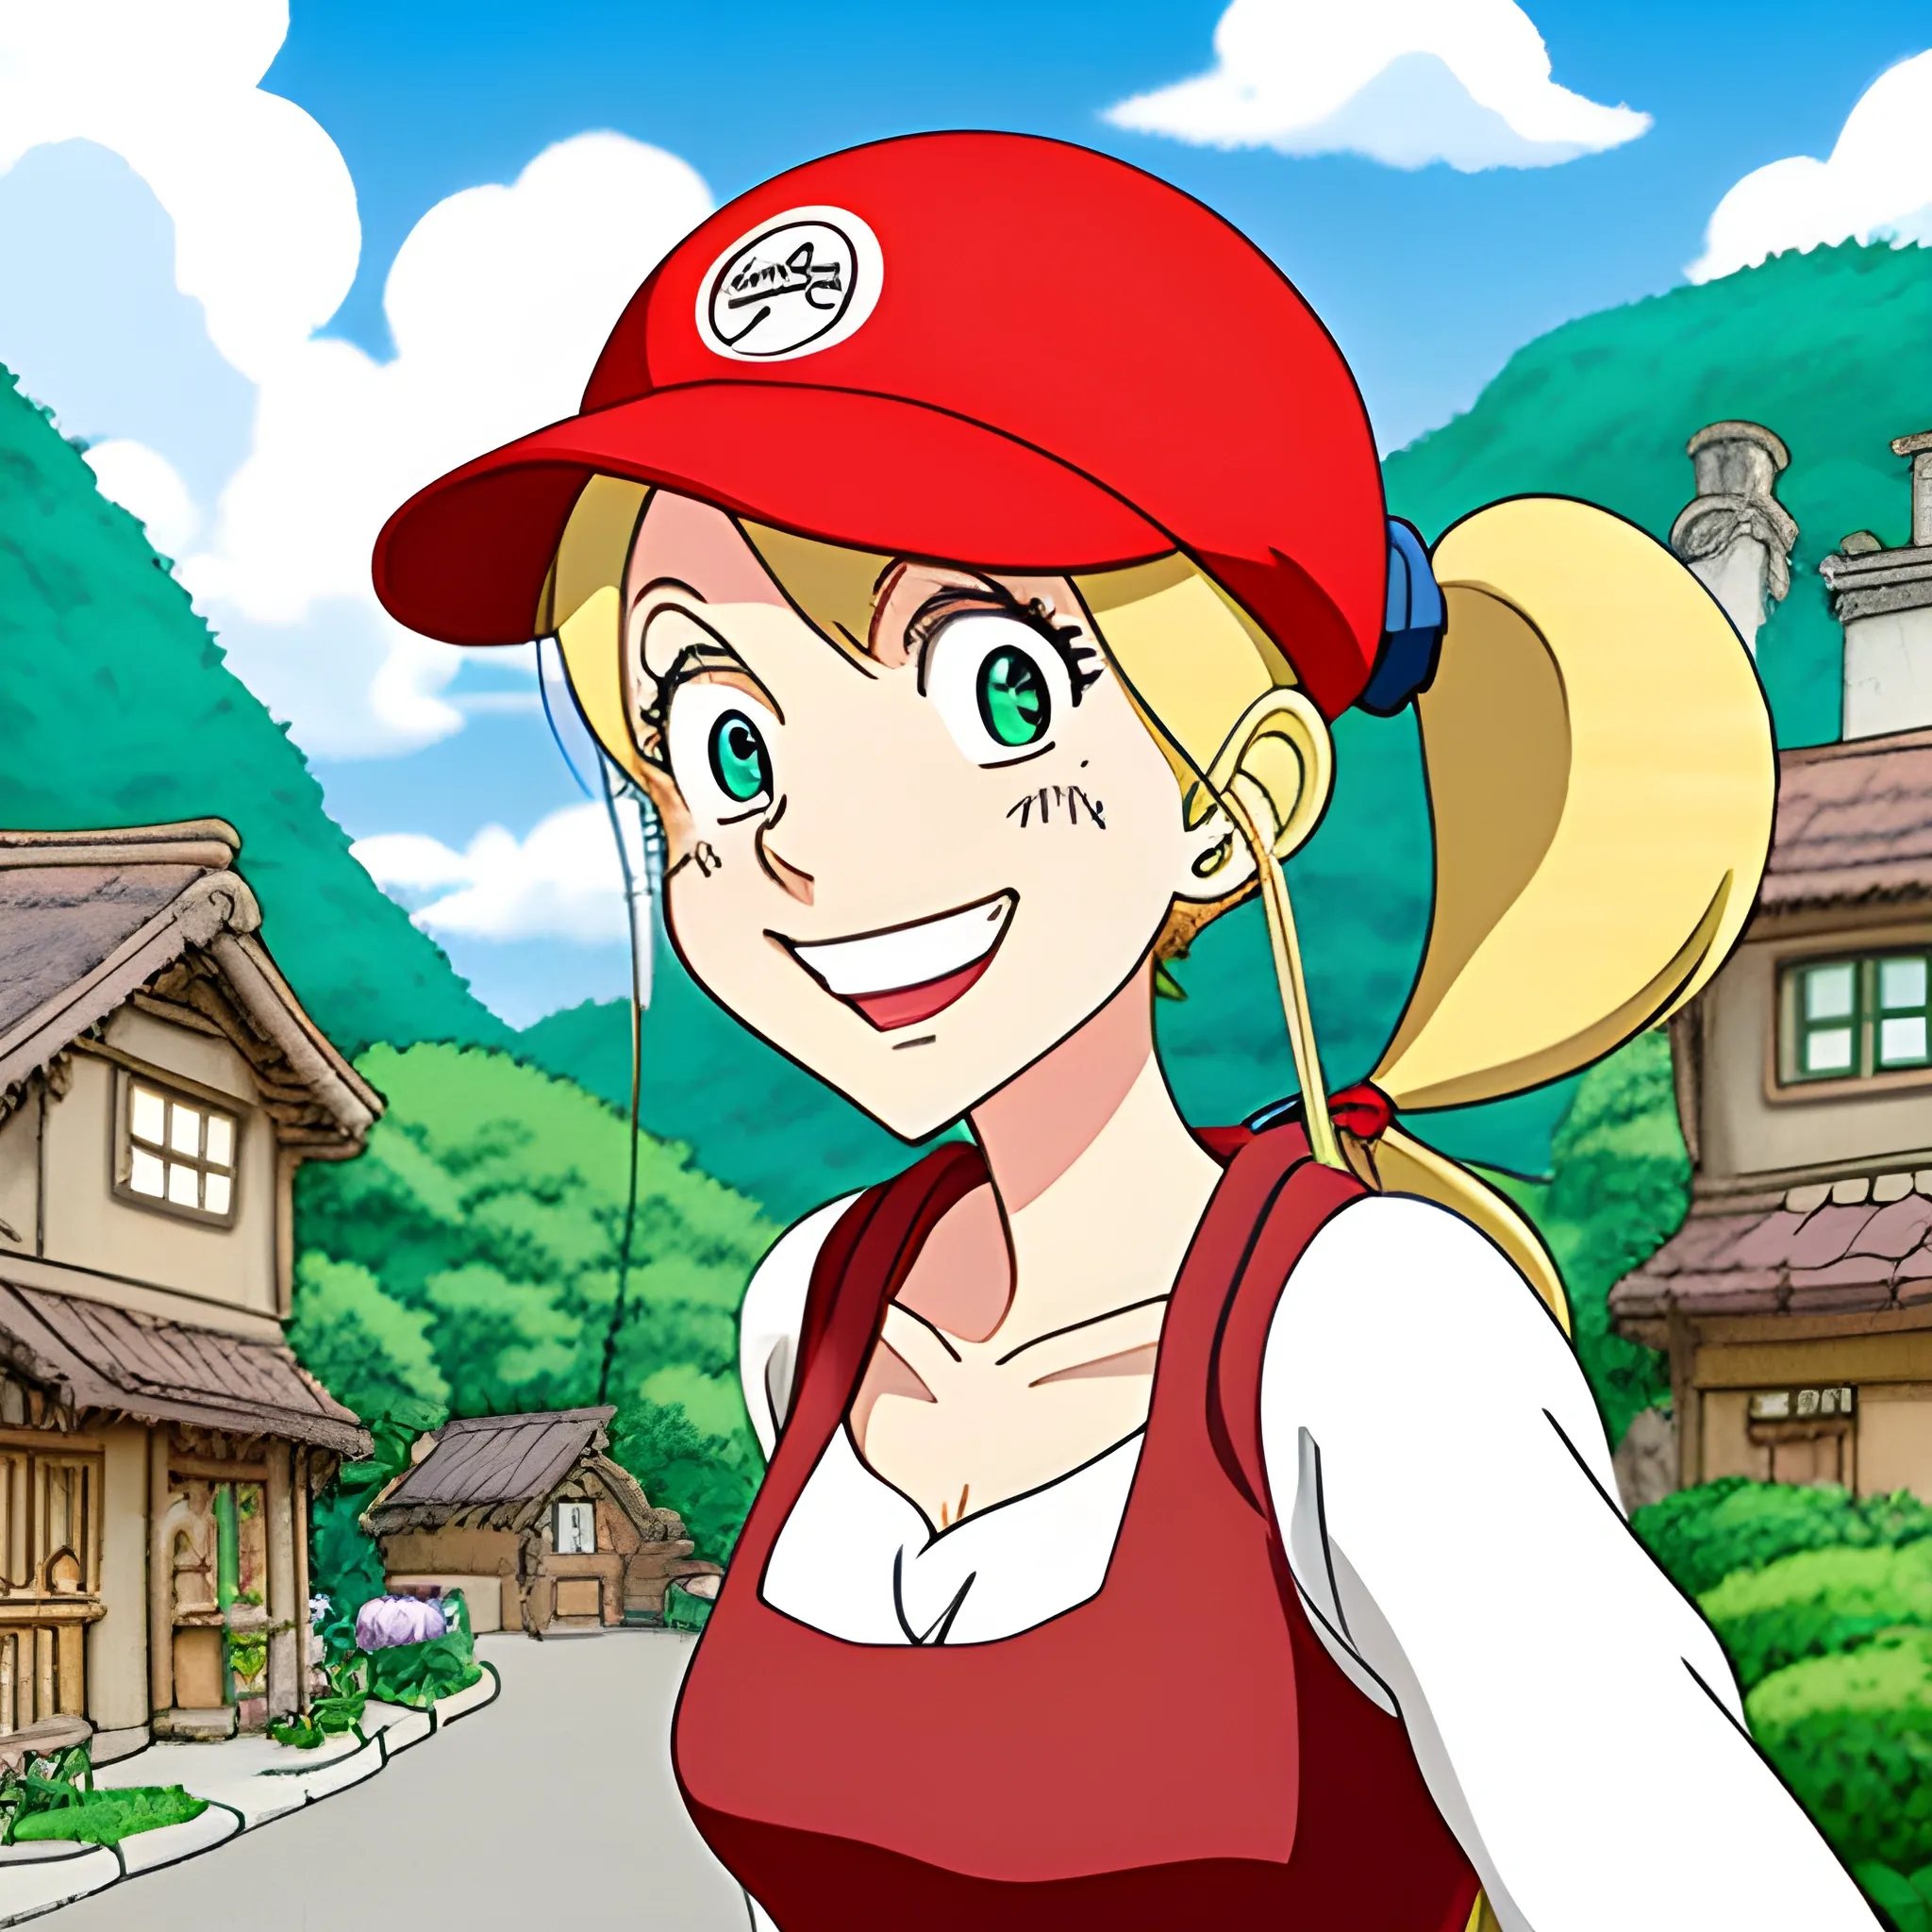 studio ghibli, where's waldo style,A very lively little girl named Keli has blonde hair and two ponytails. She runs around the village with a red schoolbag and a red hat every day, looking very happy and happy., Cartoon, Cartoon, Cartoon,five years old,little baby,beautiful big eye